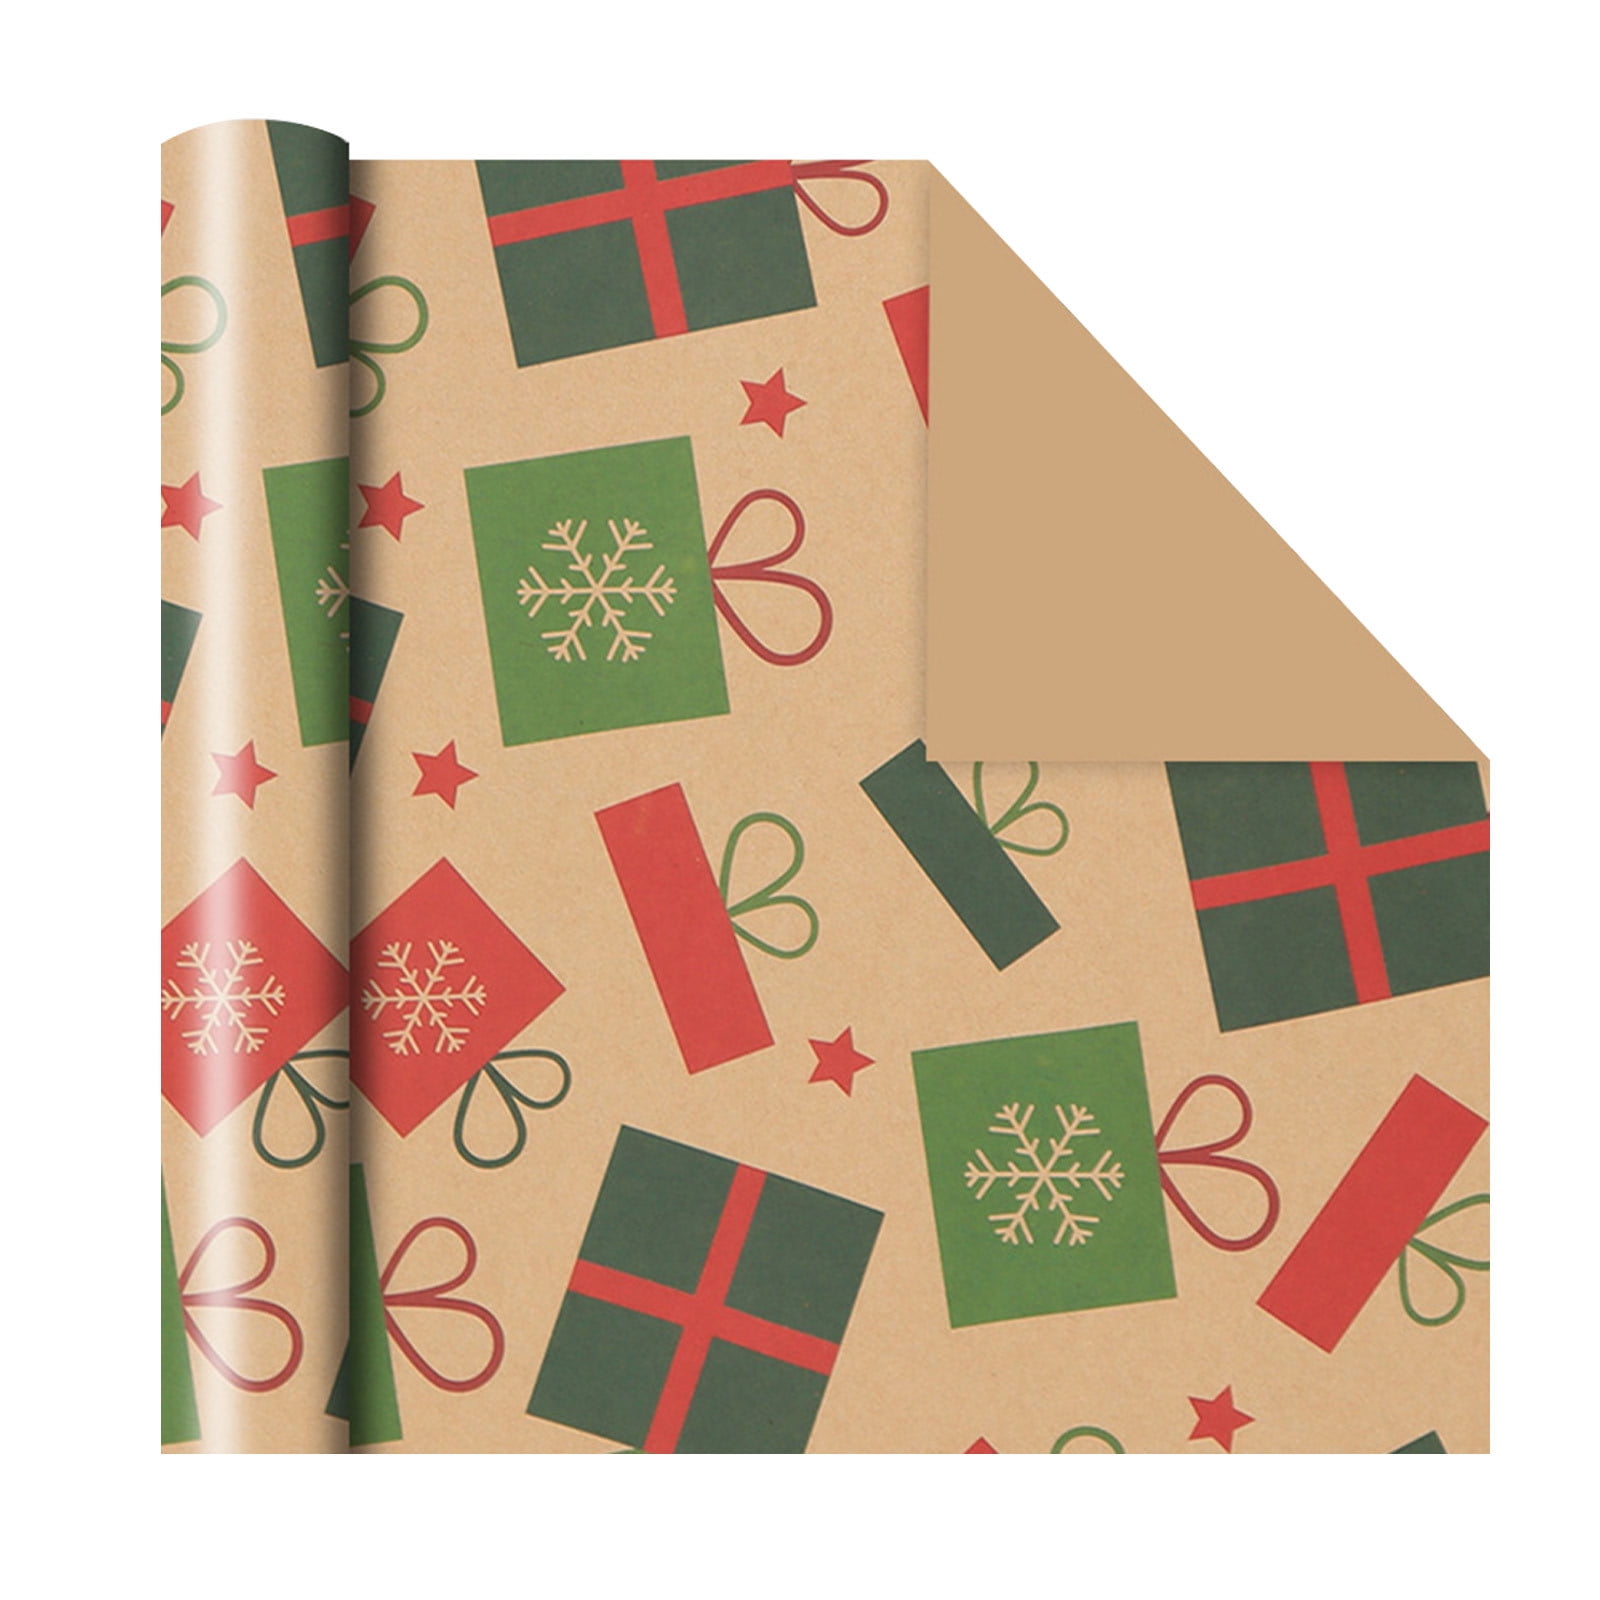 ! Qucoqpe 19.7 Christmas Wrapping Paper - Single-Sided Gift Wrapping Kraft Include Santa, Snowfake,Deer, Merry Chrismas Xmas Wrapping Paper 